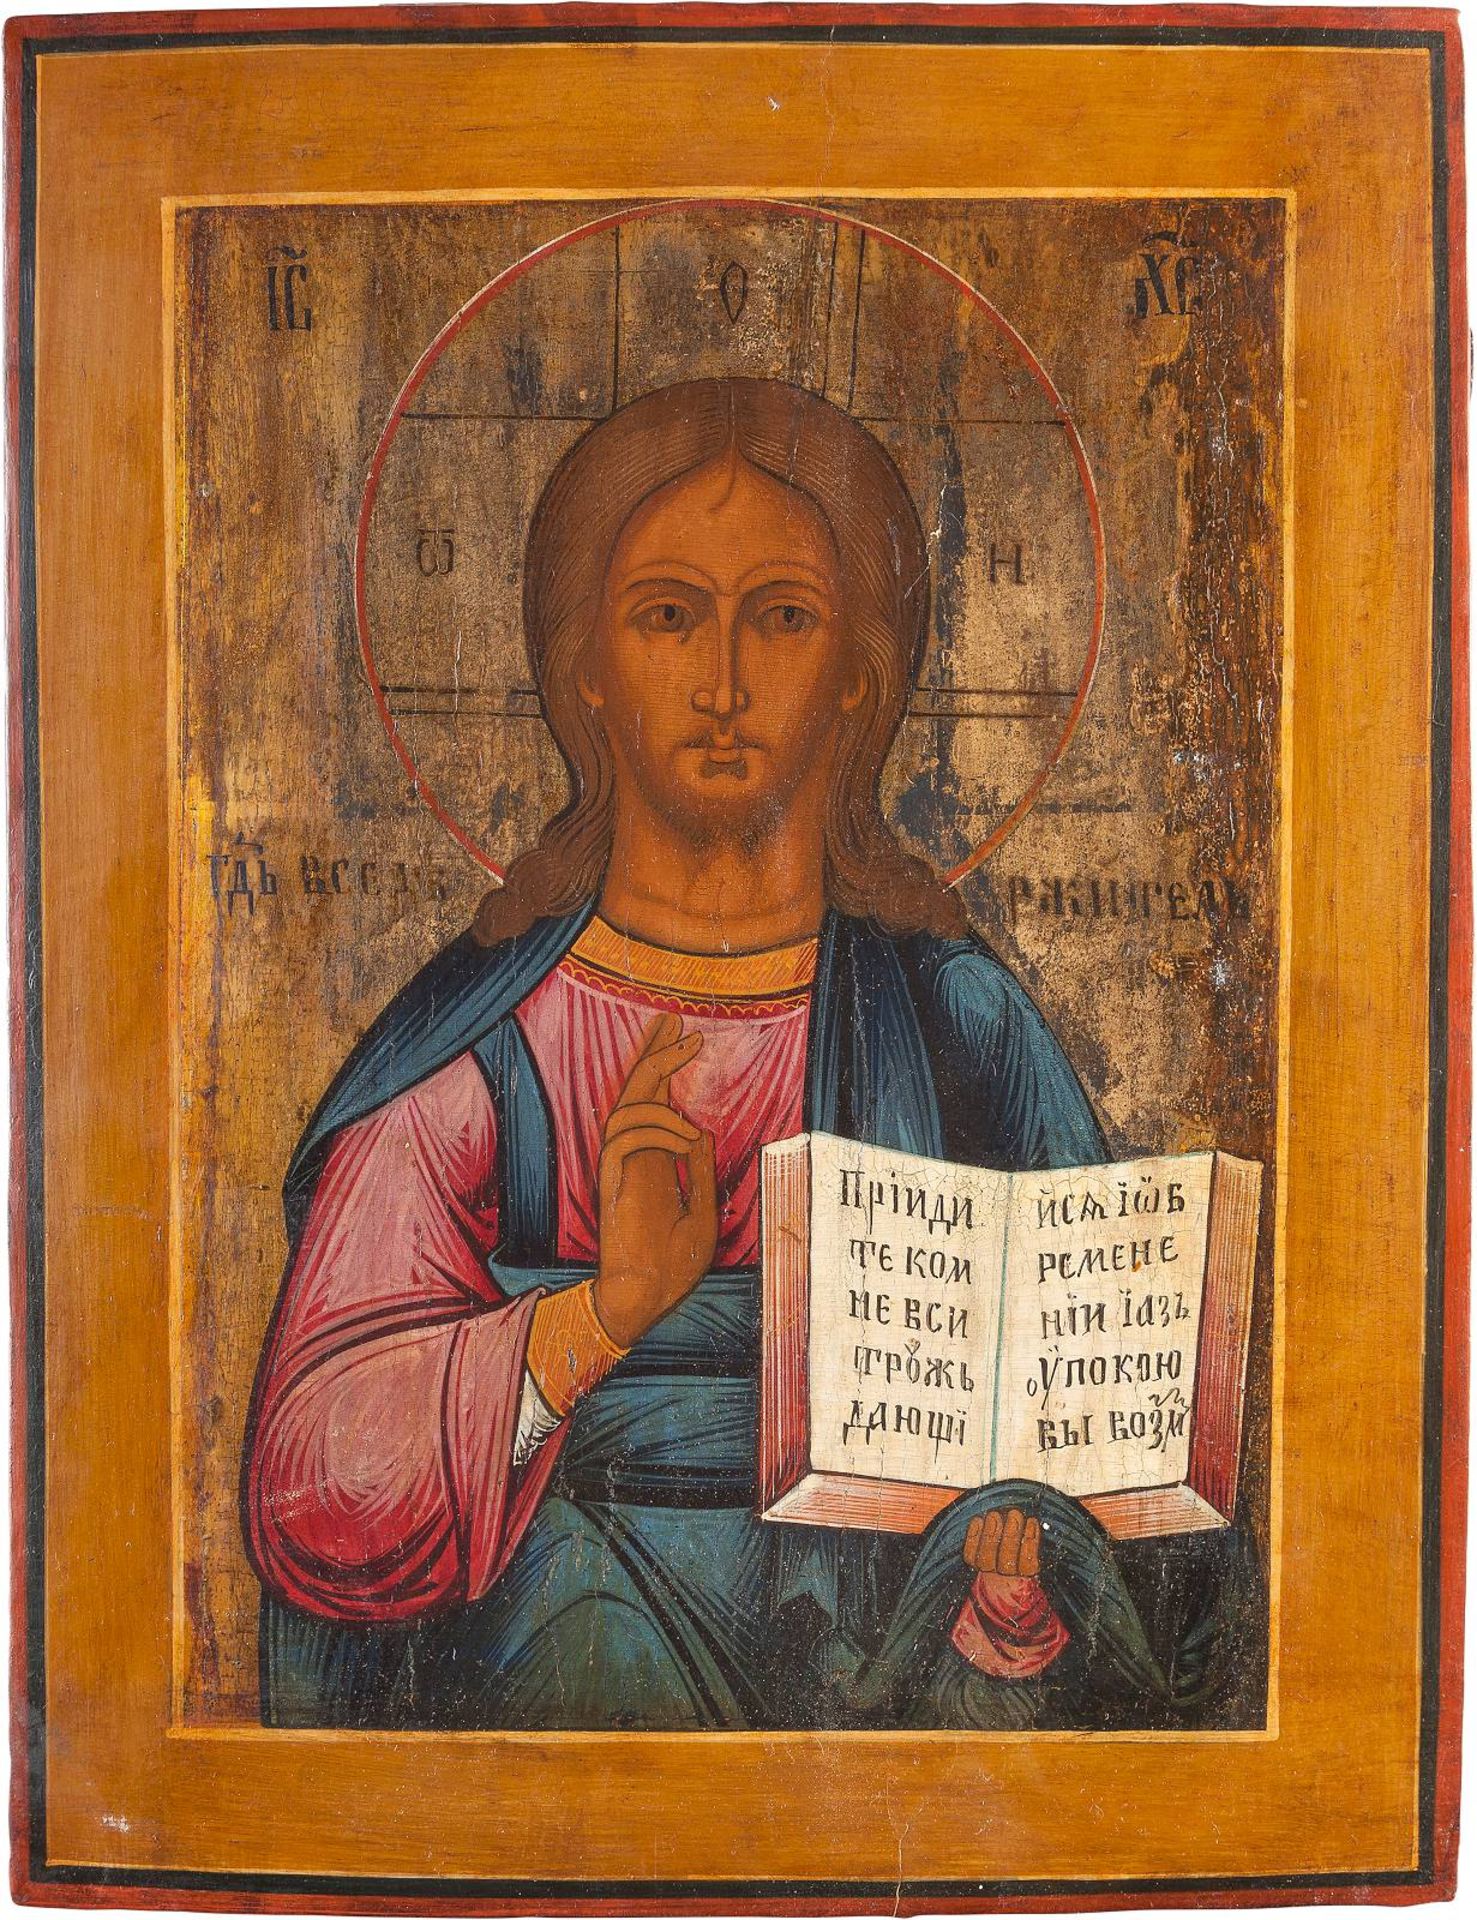 AN ICON SHOWING CHRIST PANTOKRATORRussian, circa 1800 Tempera on wood panel. The background made